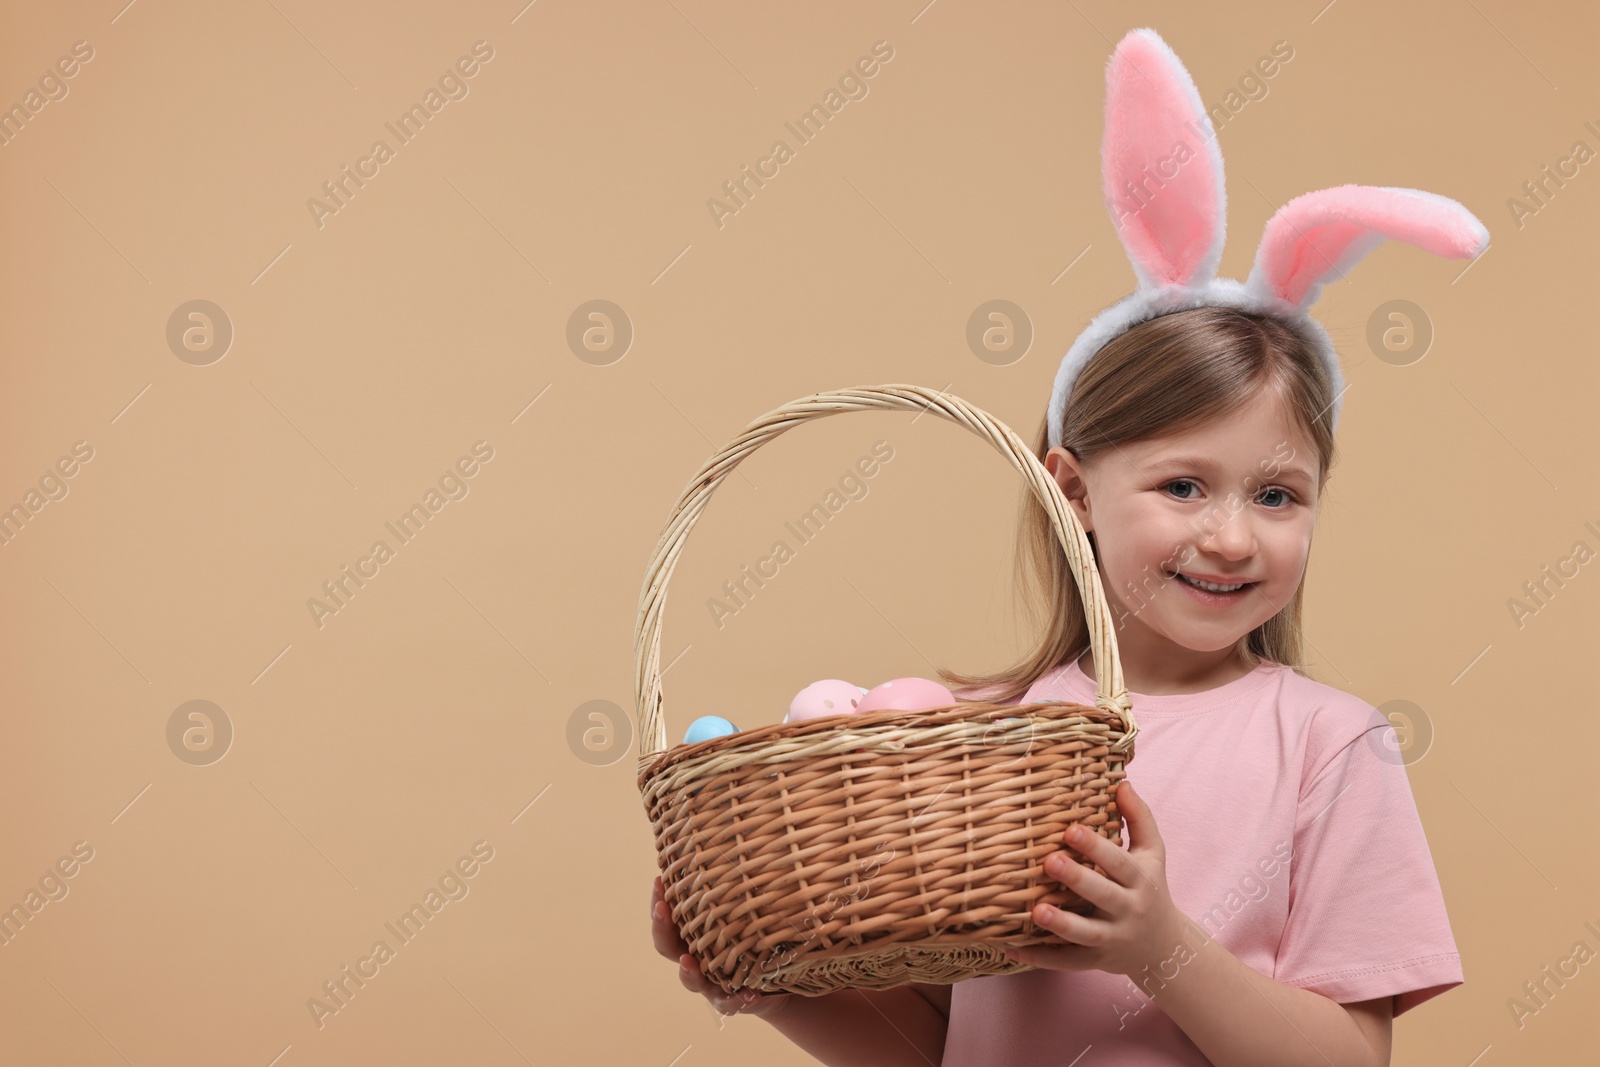 Photo of Easter celebration. Cute girl with bunny ears holding basket of painted eggs on beige background, space for text